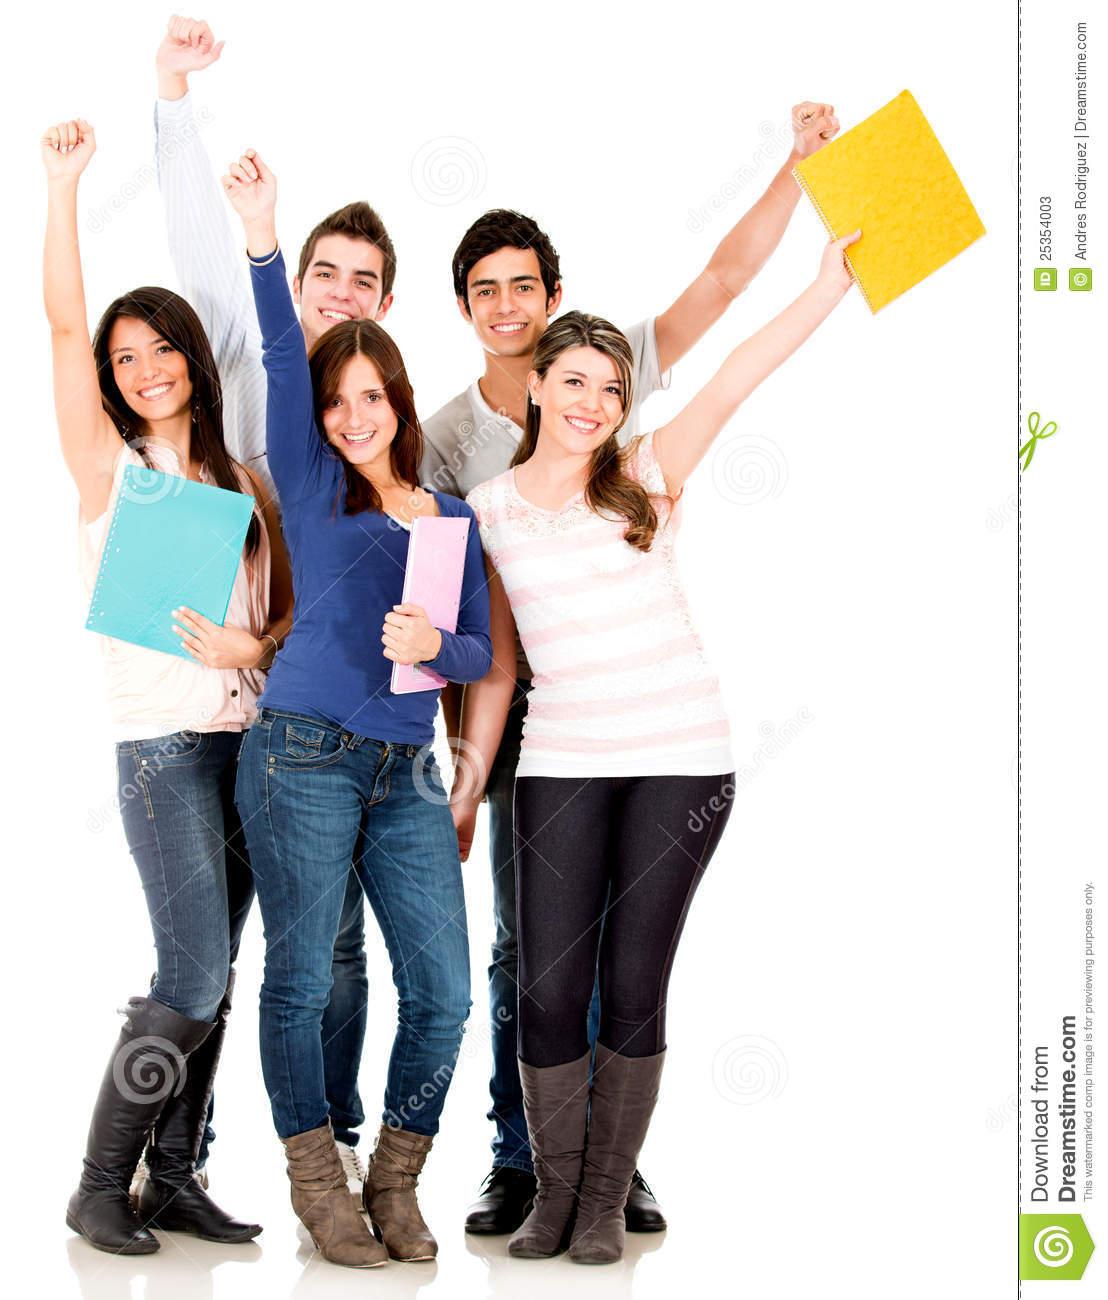 Happy Group Of College Students With Arms Up   Isolated Over White